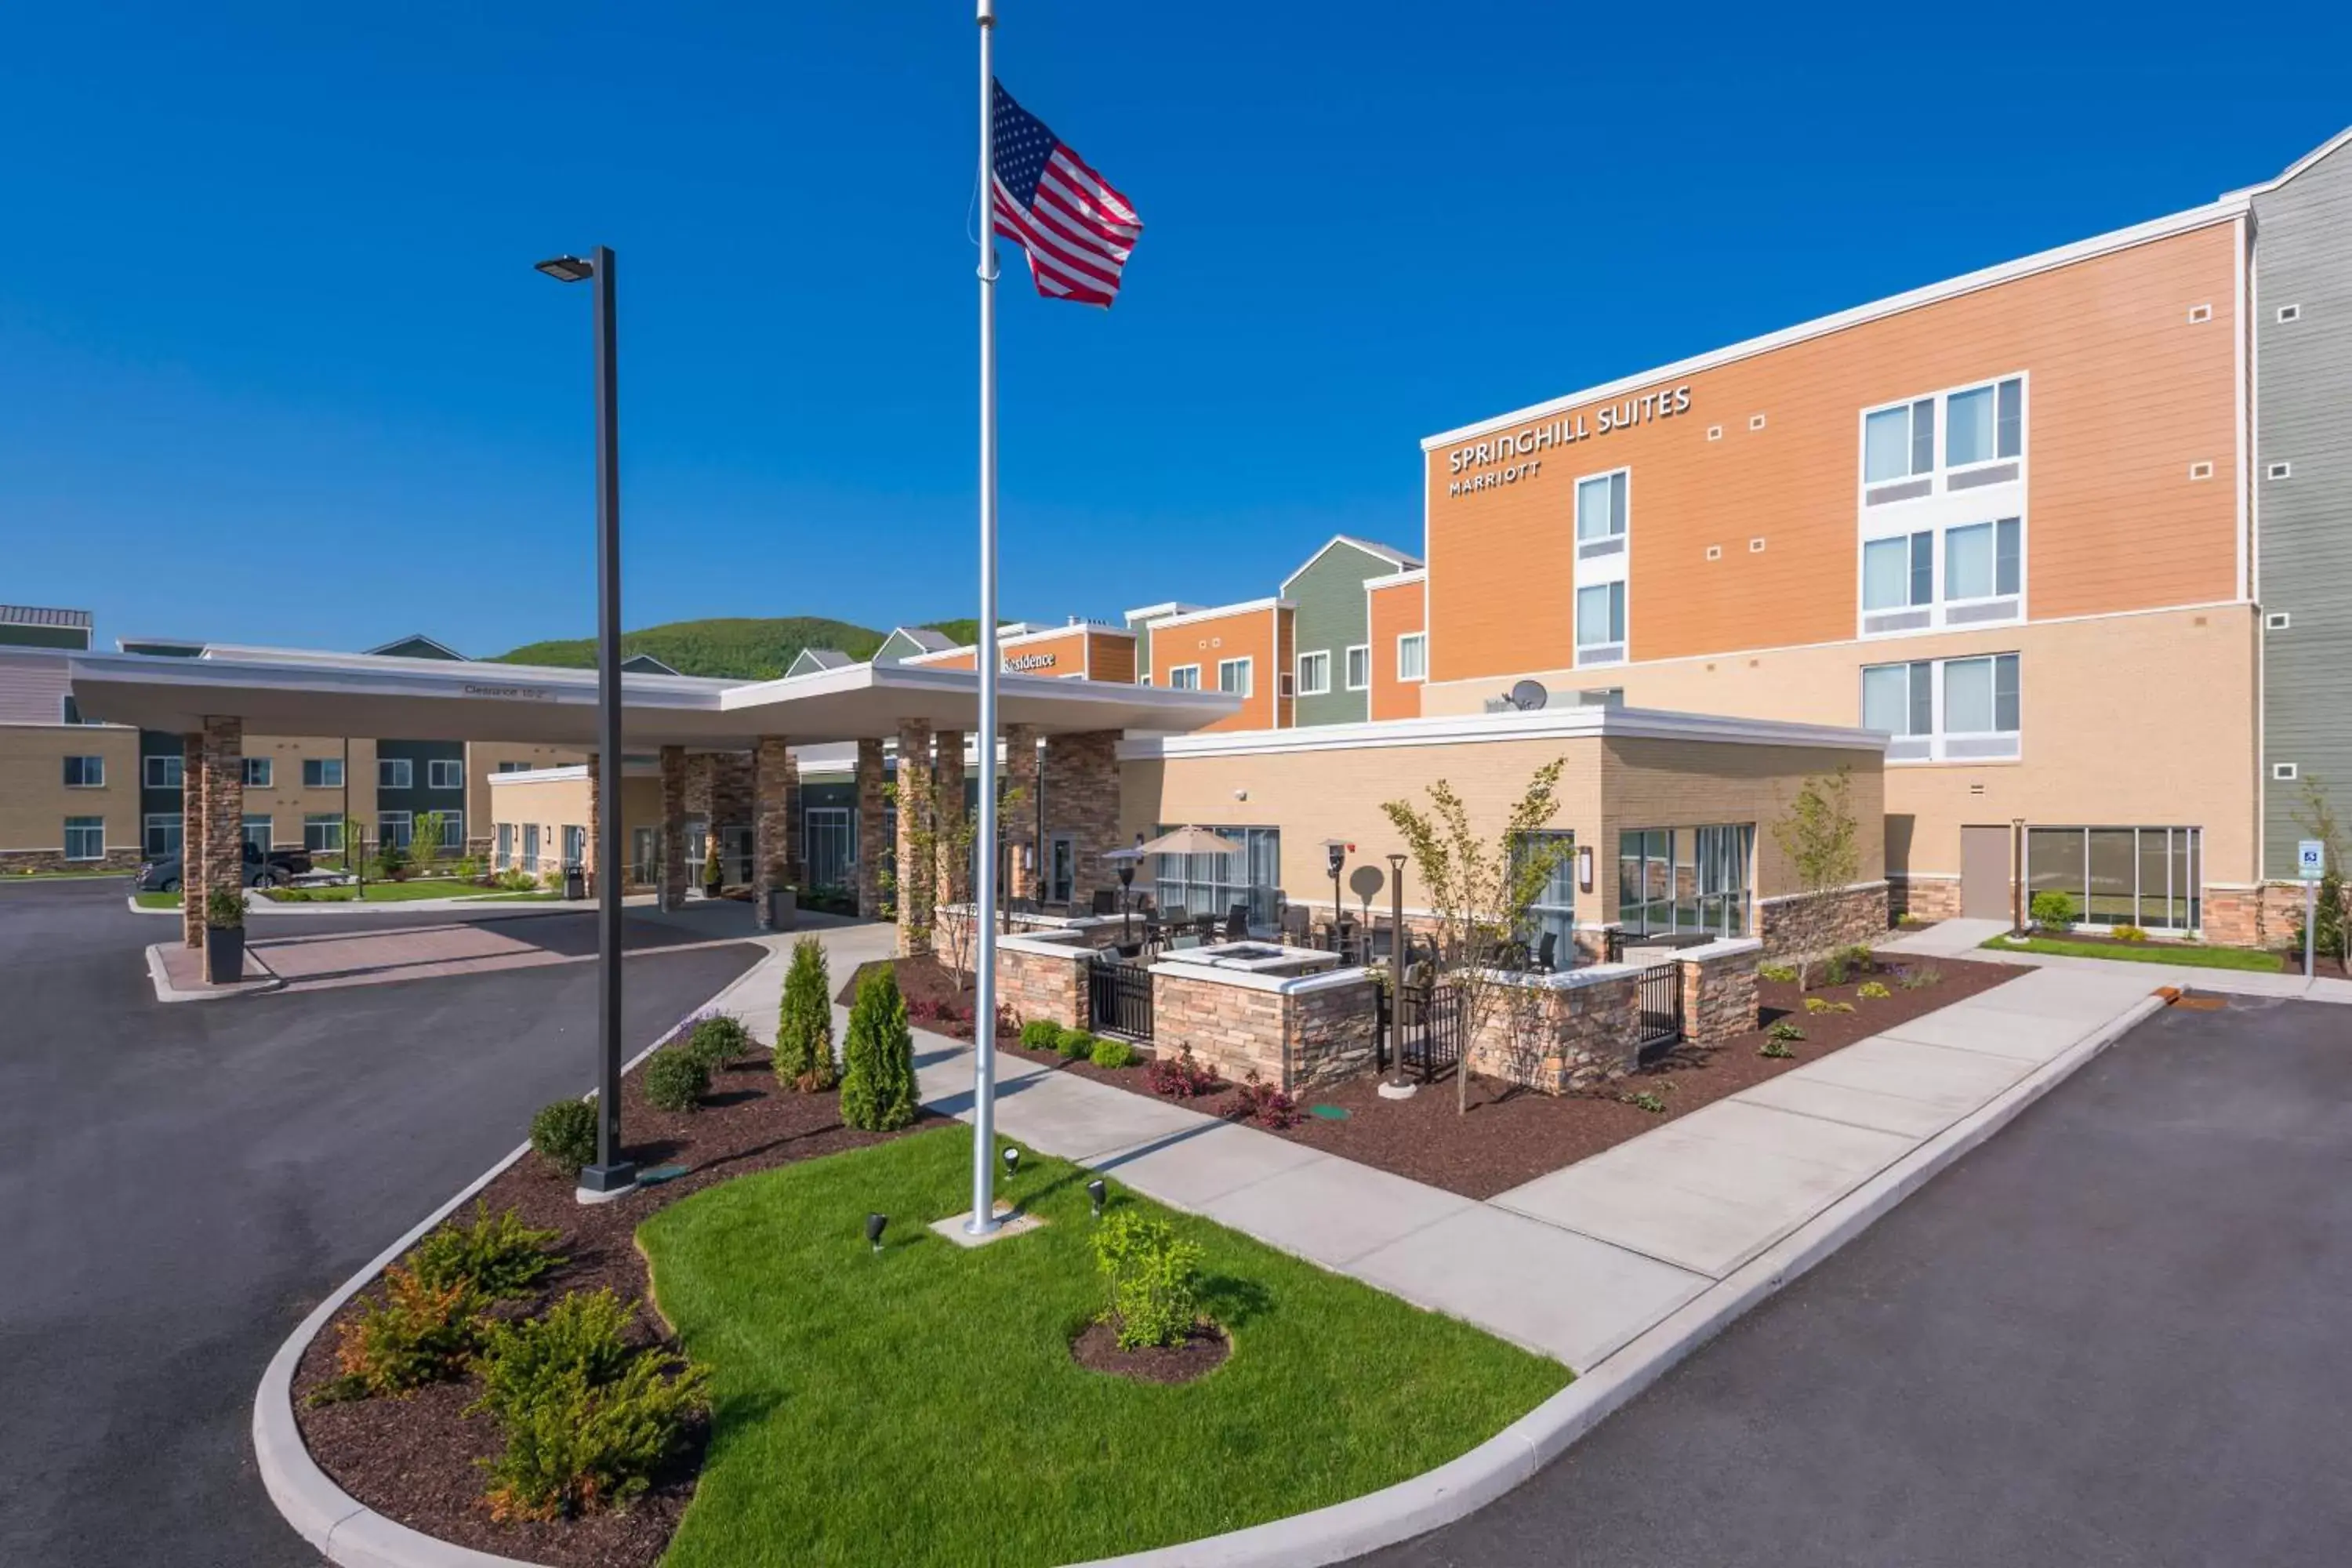 Property building in SpringHill Suites by Marriott Fishkill